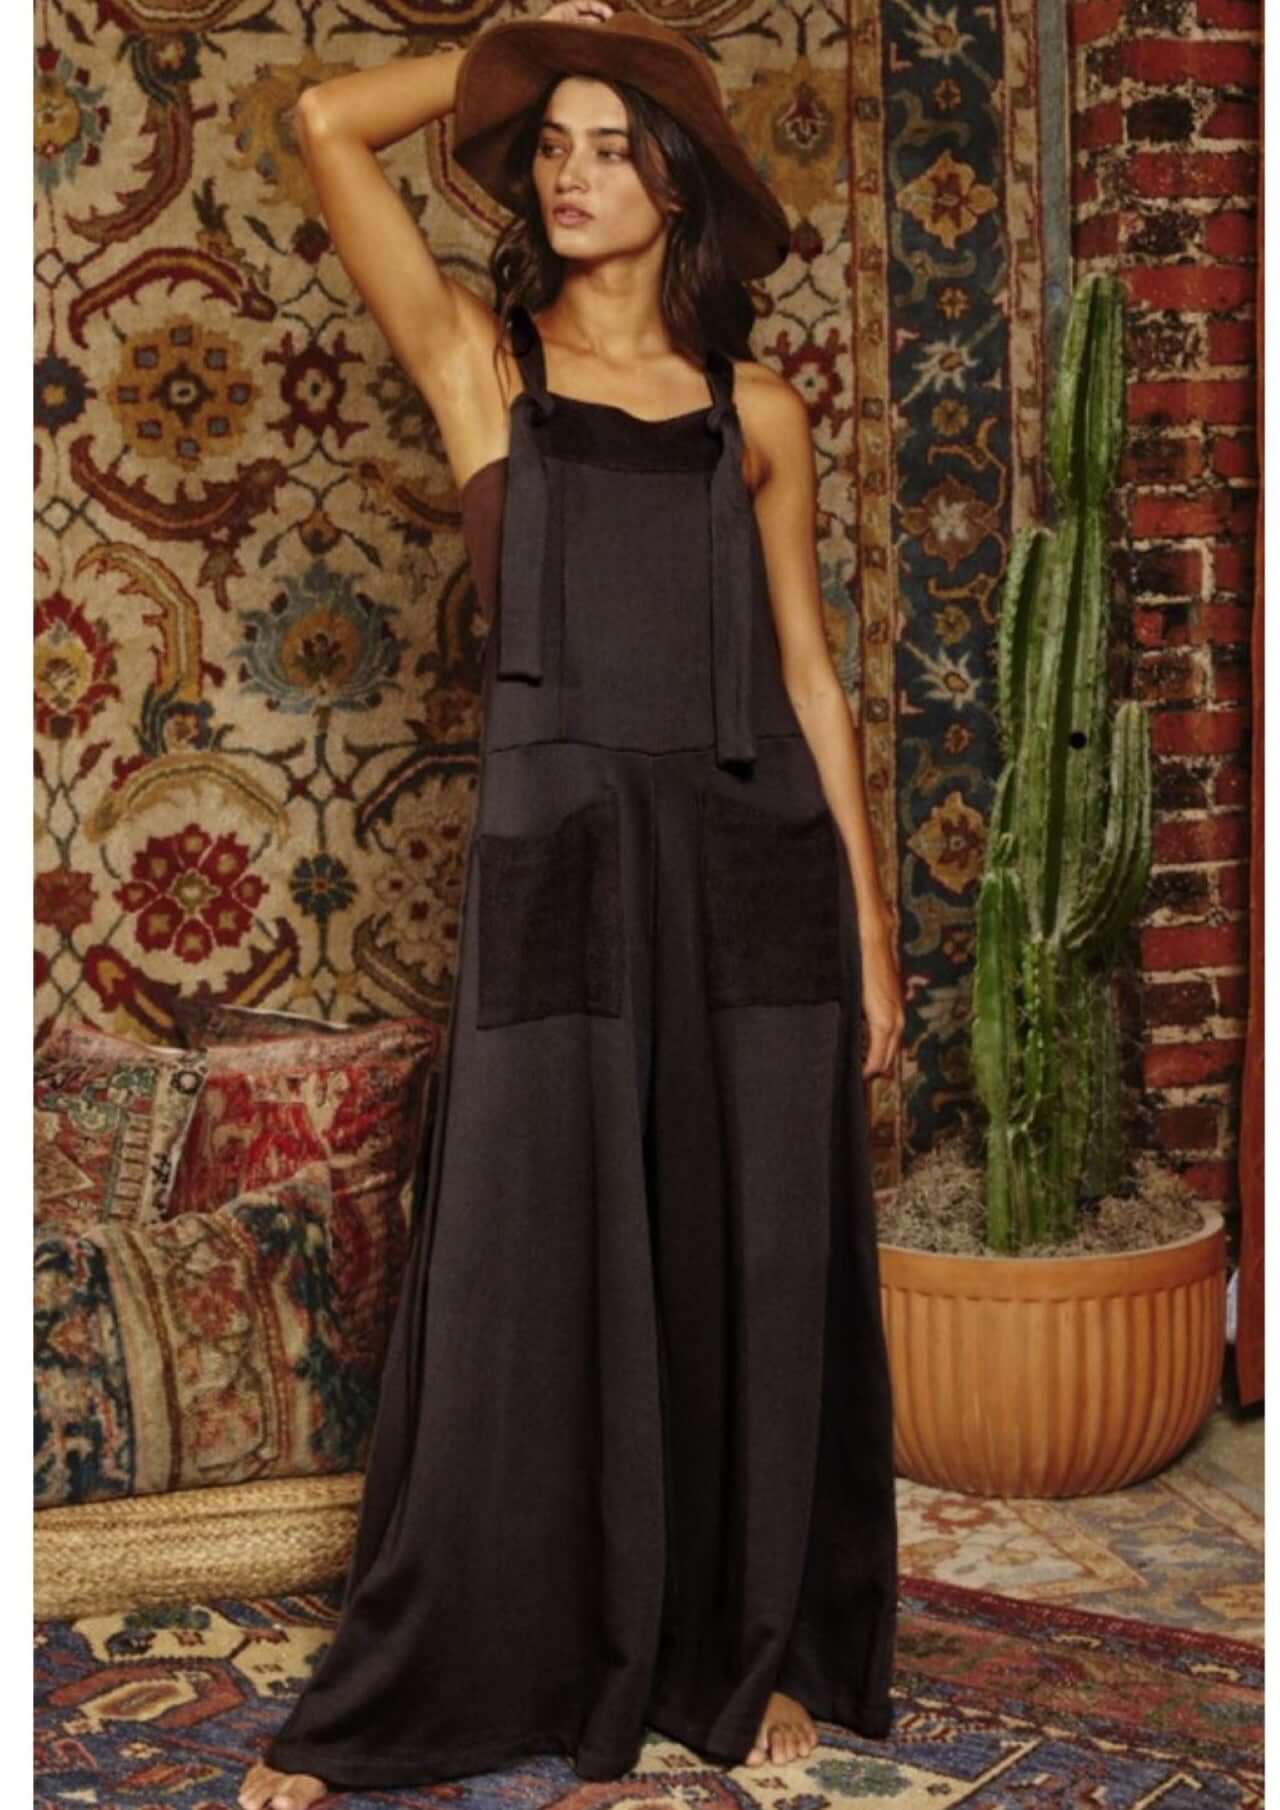 Bucket List Style# R5067 Ladies French Terry Black Overall Casual Fall Season Jumpsuit with Adjustable Straps  | Made in USA | Women's Made in America Boutique